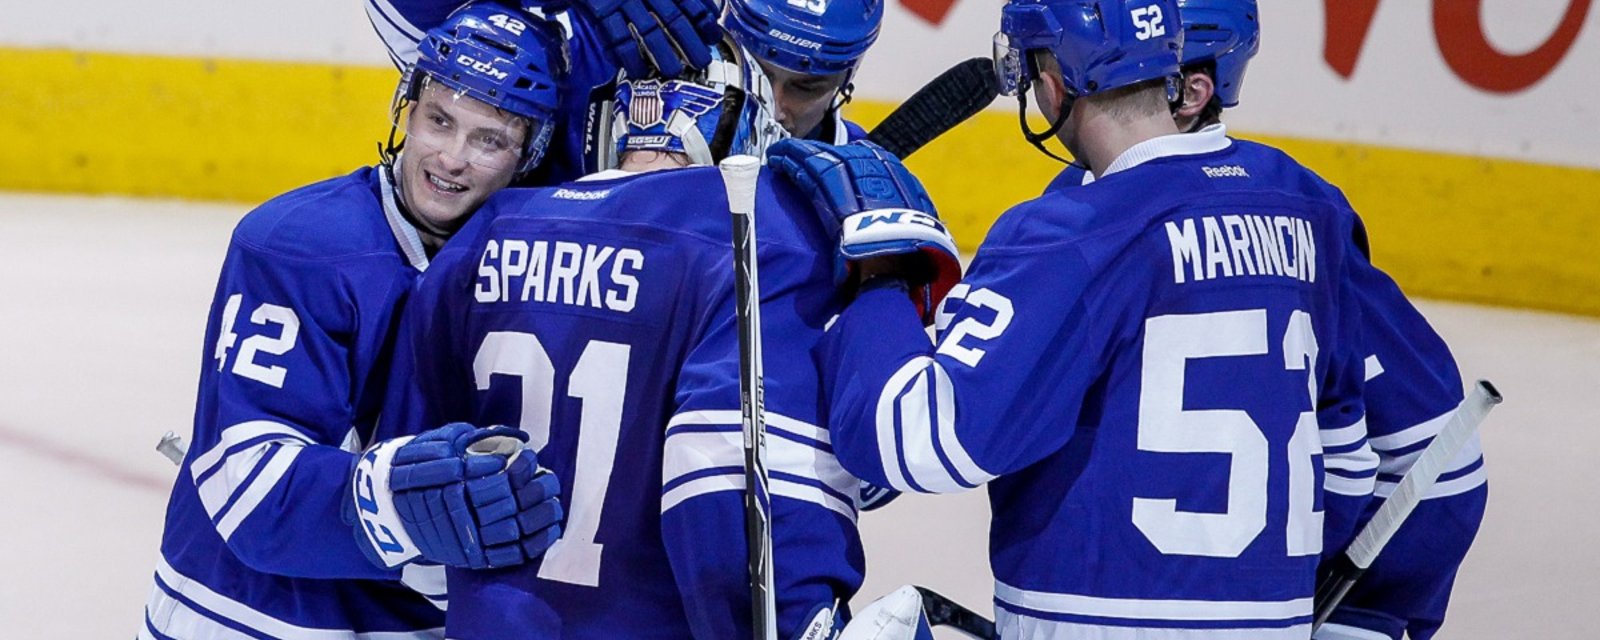 Report: Marlies mysteriously pull Garret Sparks in the first period.